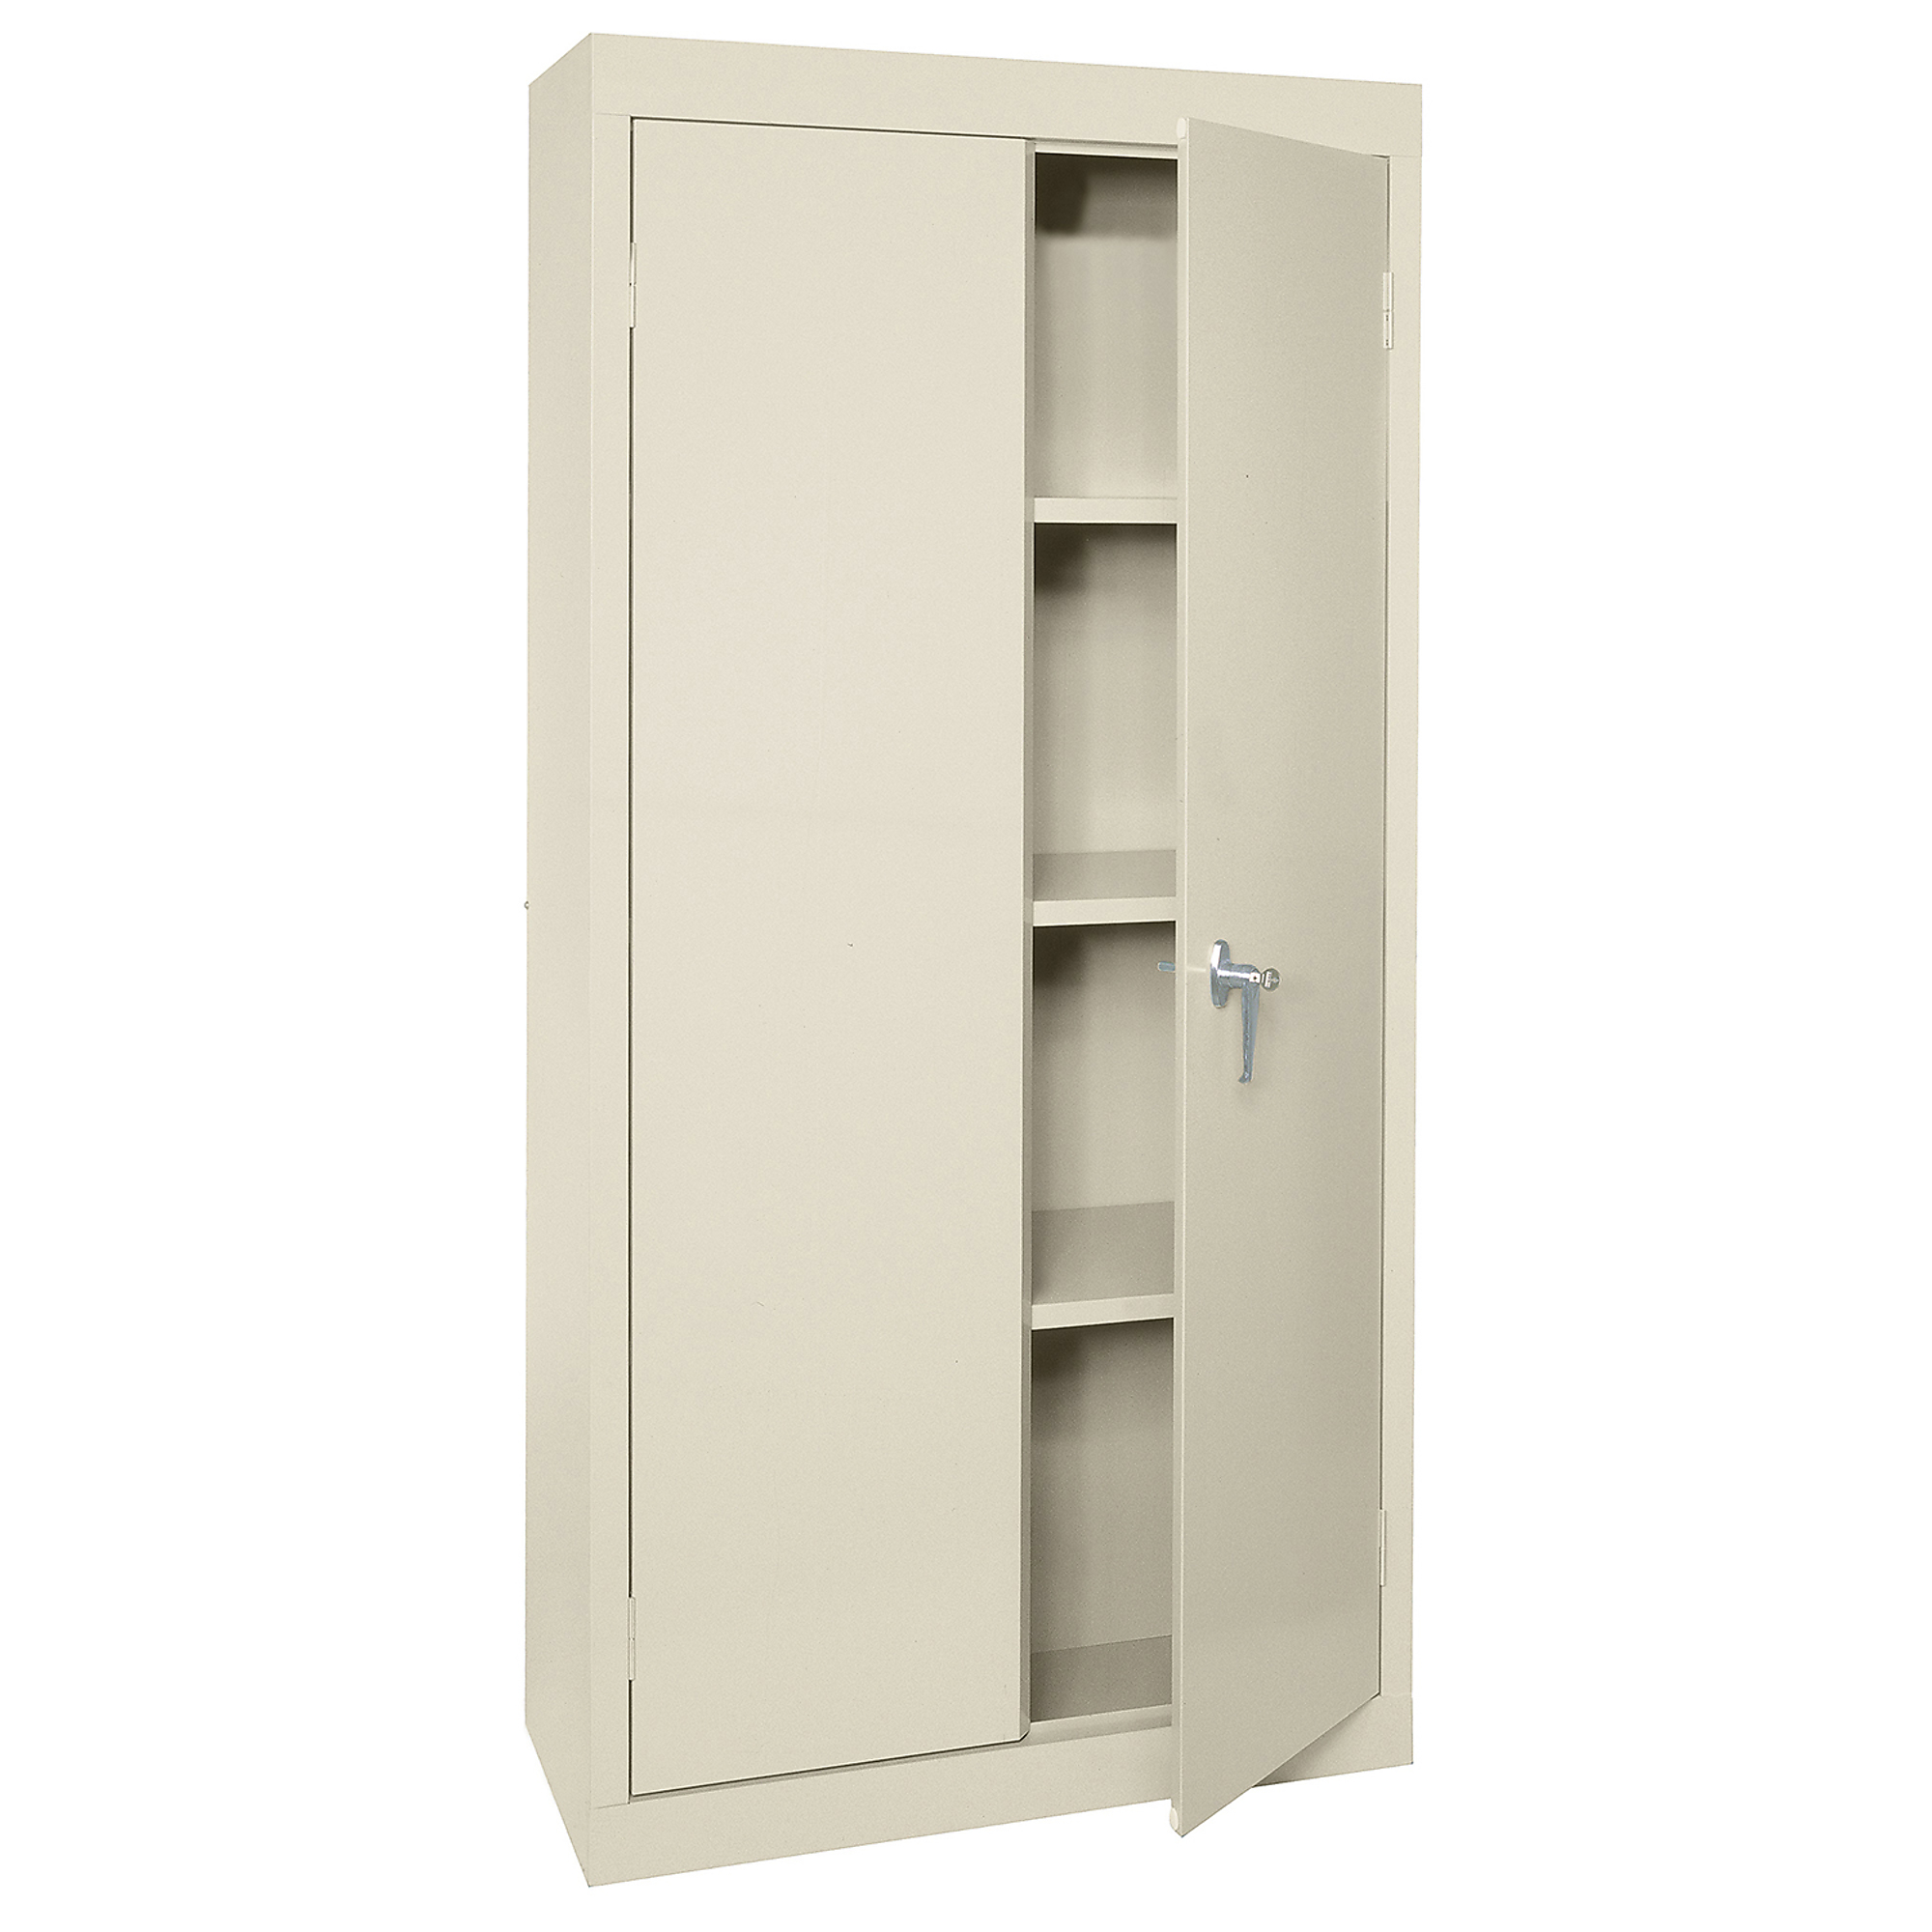 Sandusky Lee Sandusky, Value Line Cabinet 30x18x72 Putty, Height 72 in, Width 30 in, Color Putty, Model VF31301872-07